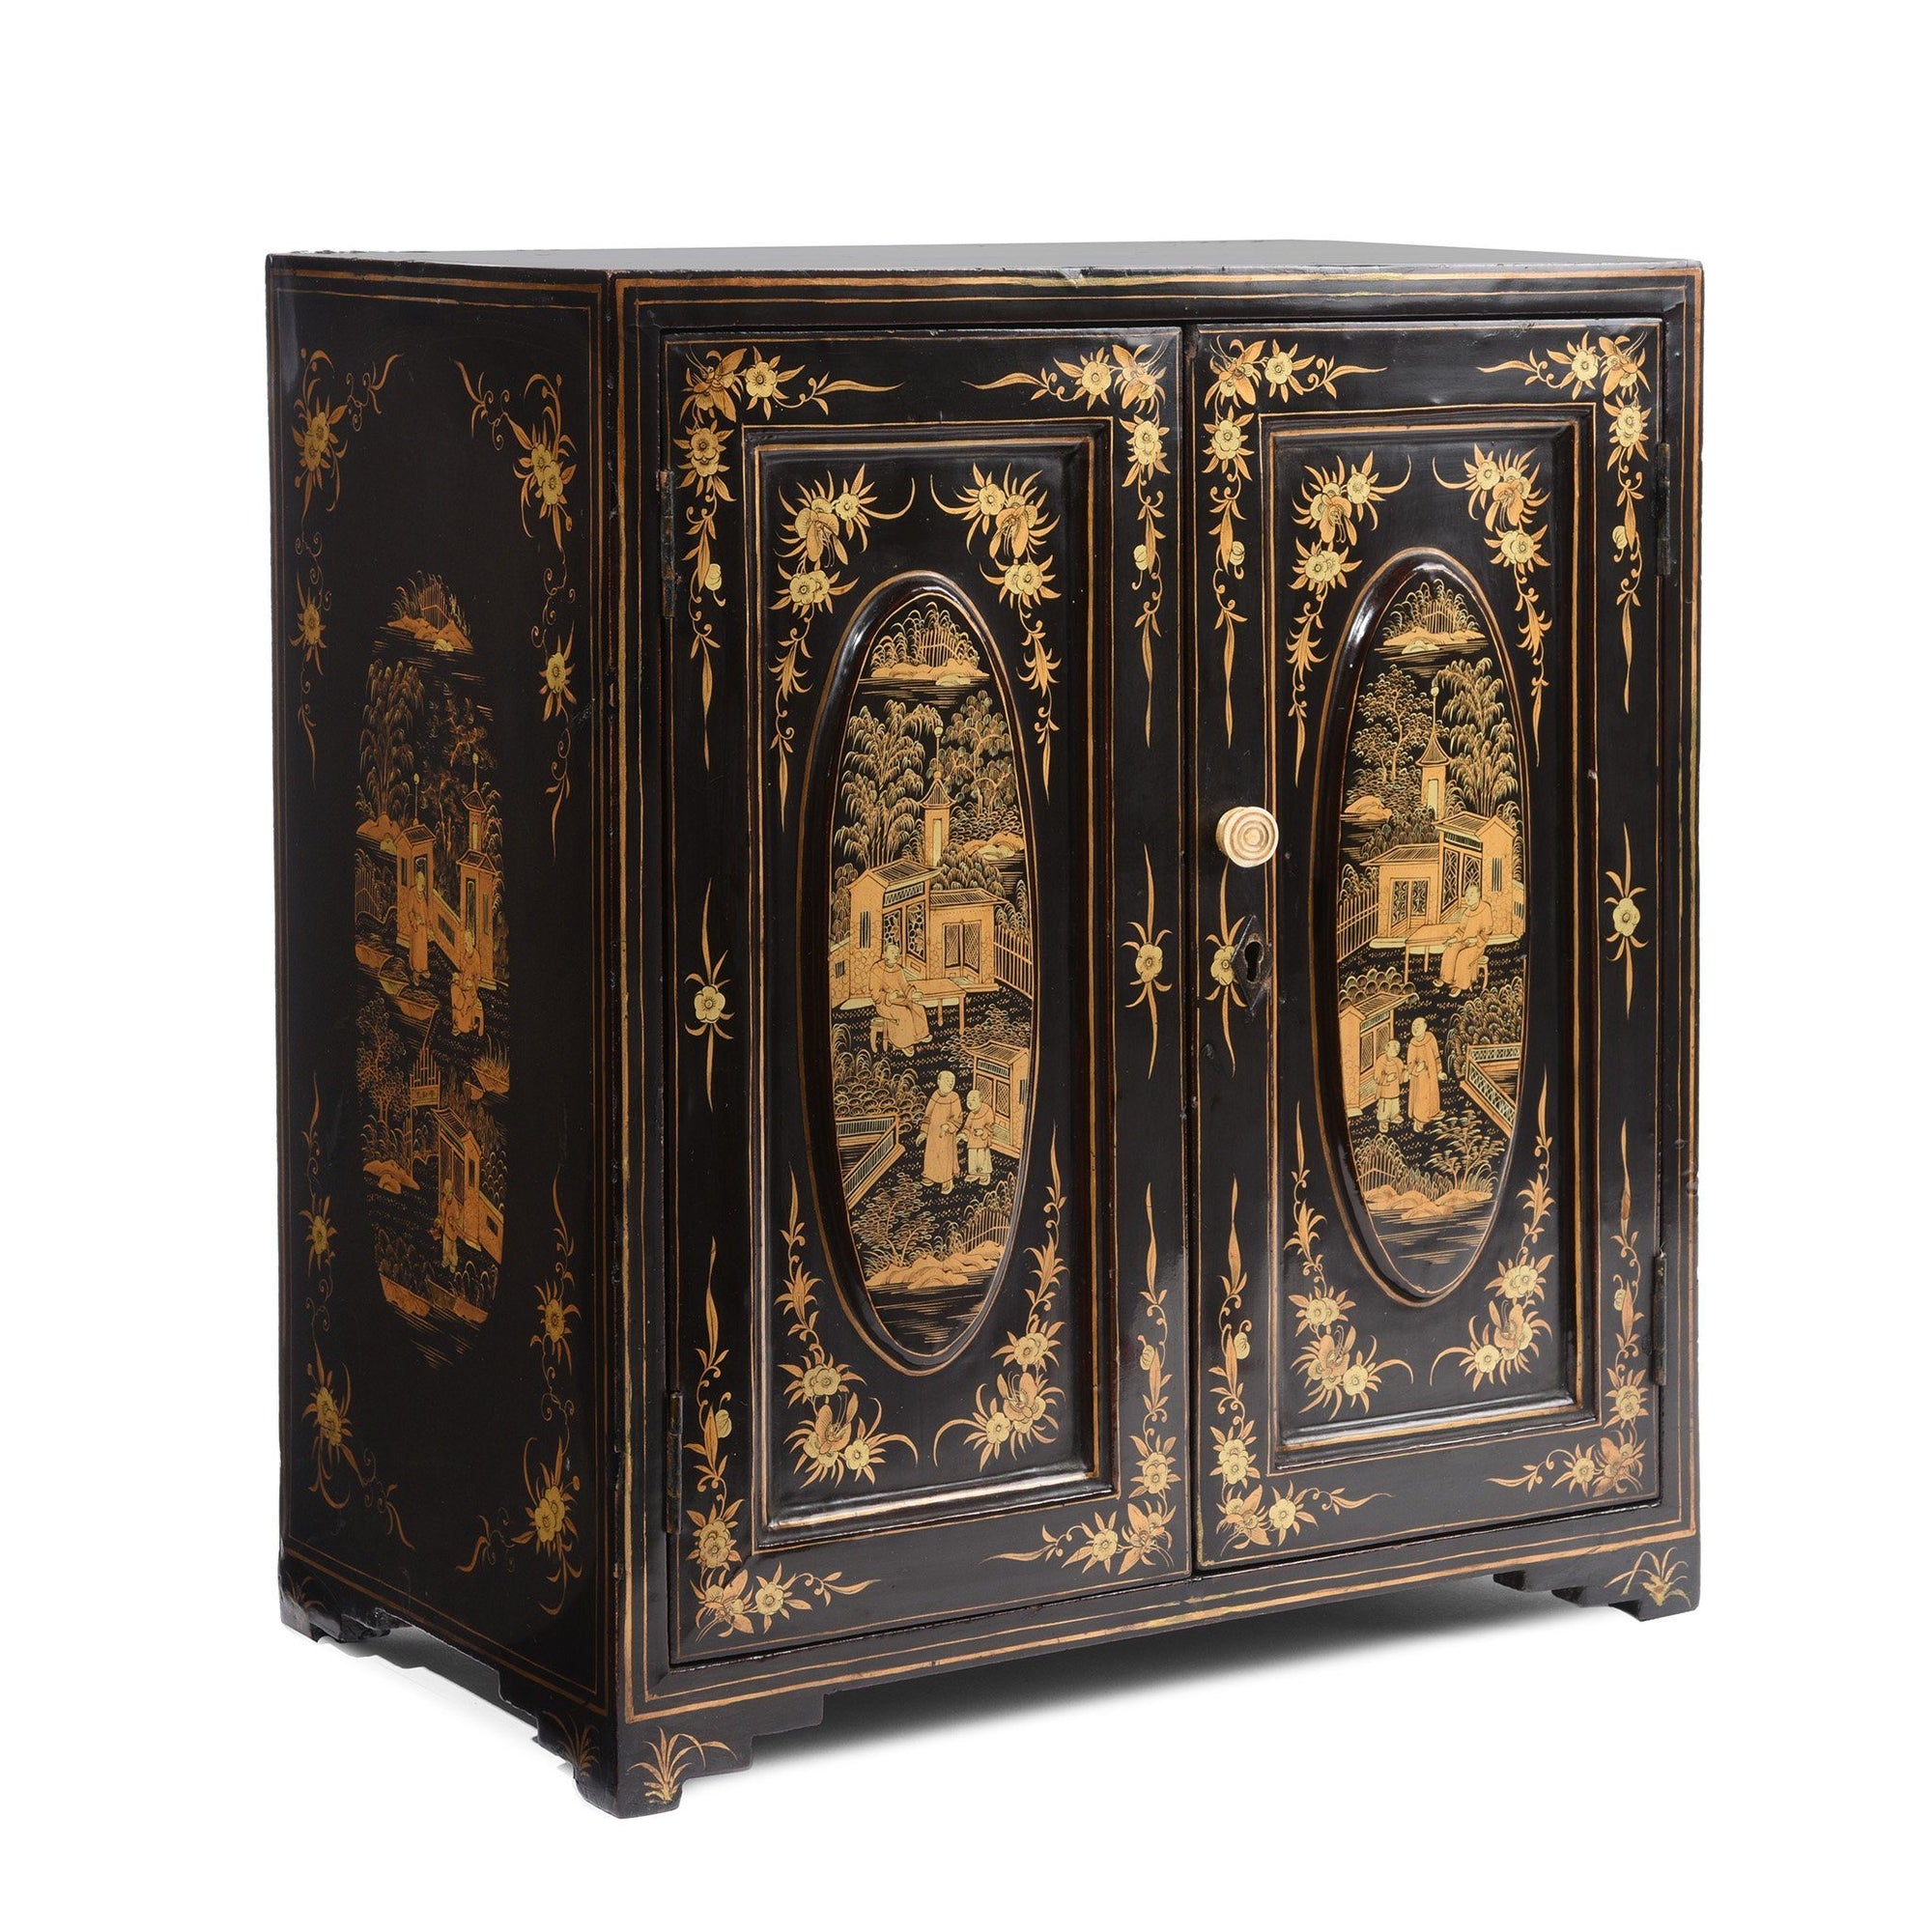 Chinese Export Gilt Black Lacquer Jewellery Table Cabinet - Early 19thC | Indigo Antiques